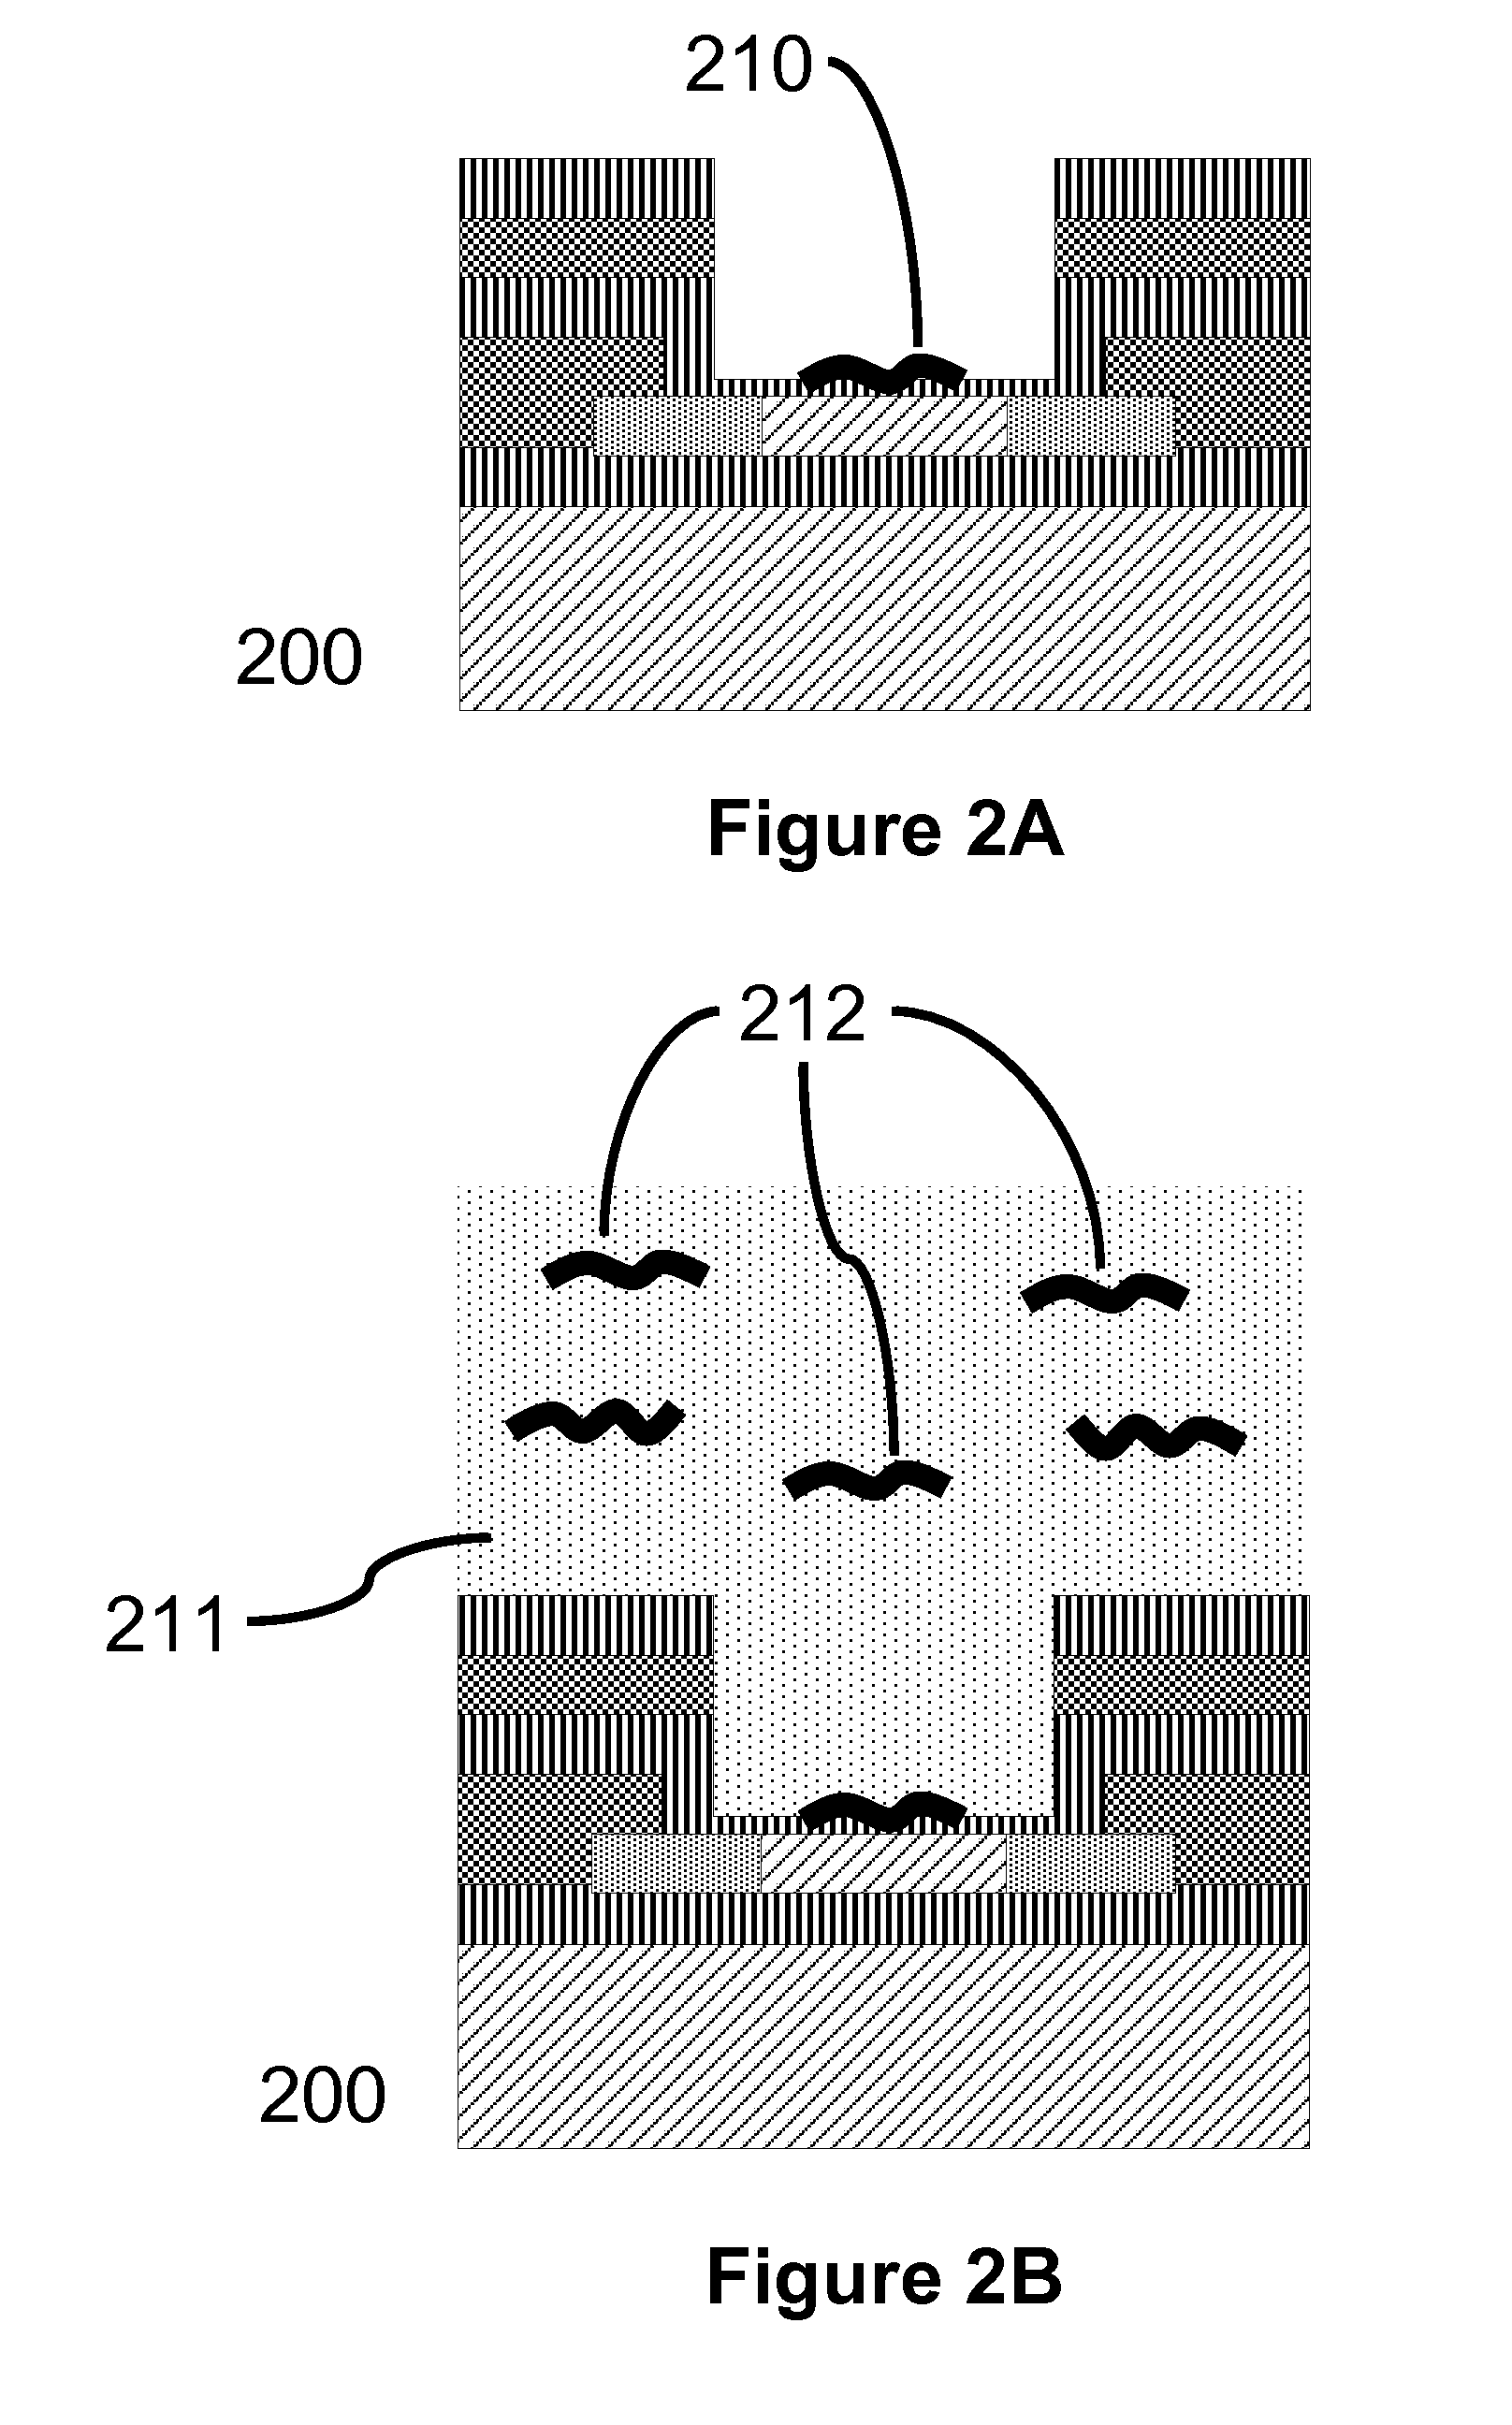 DNA sequencing and amplification systems using nanoscale field effect sensor arrays